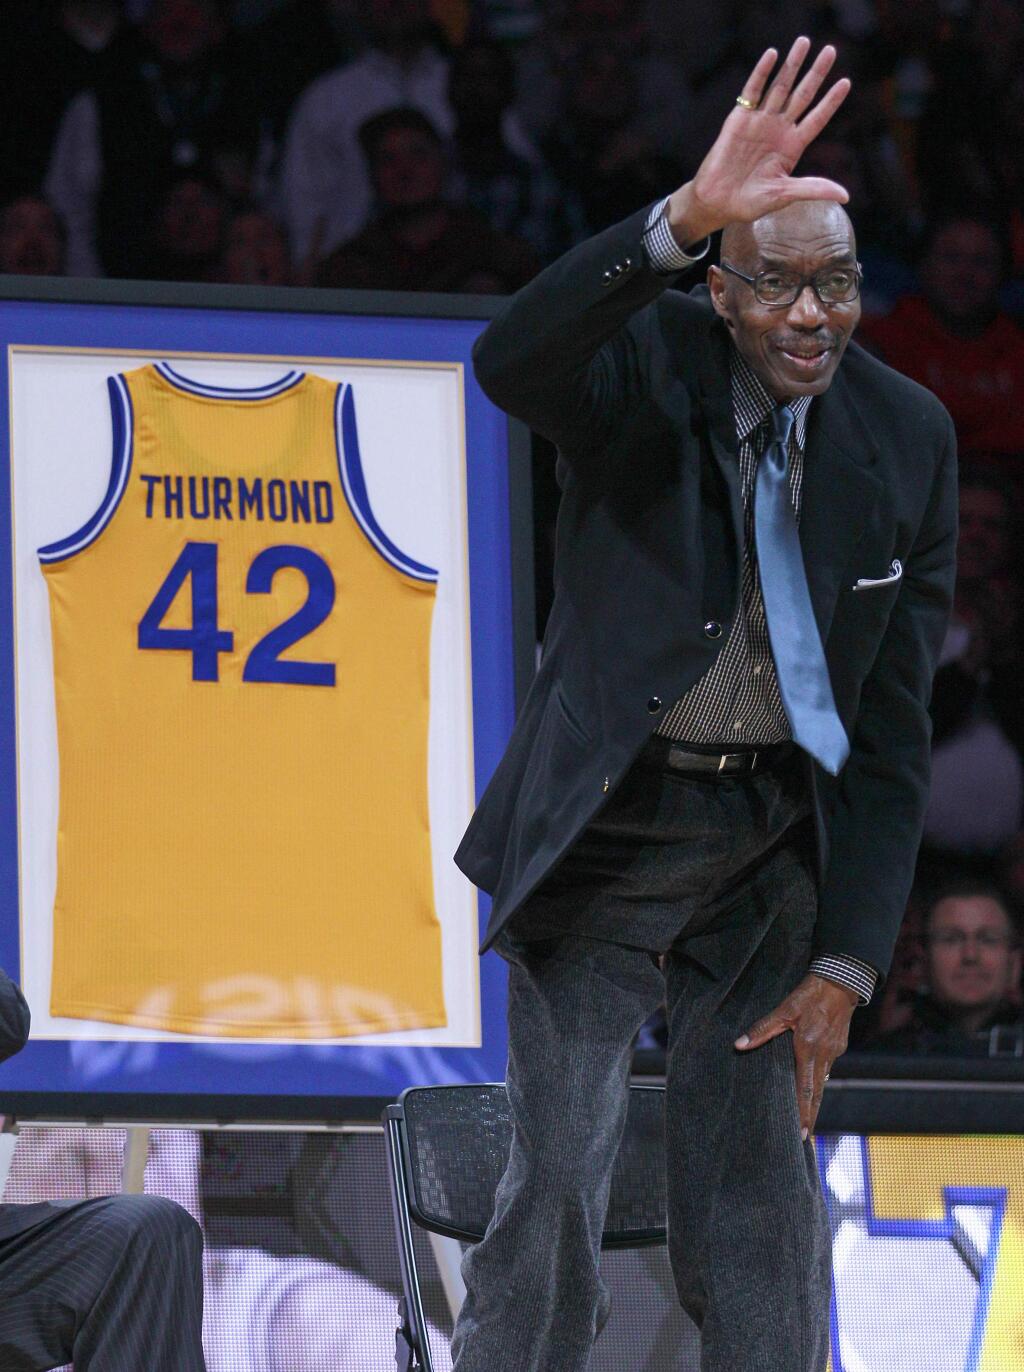 FILE - In this March 19, 2012, file photo, former Golden State Warriors player Nate Thurmond waves during a halftime ceremony if an NBA basketball game between the Warriors and the Minnesota Timberwolves in Oakland, Calif. Thurmond, a Hall of Fame center and longtime Golden State Warrior, died Saturday, July 16, 2016, after a short battle with leukemia, the team announced. He was 74. (AP Photo/Jeff Chiu, File)